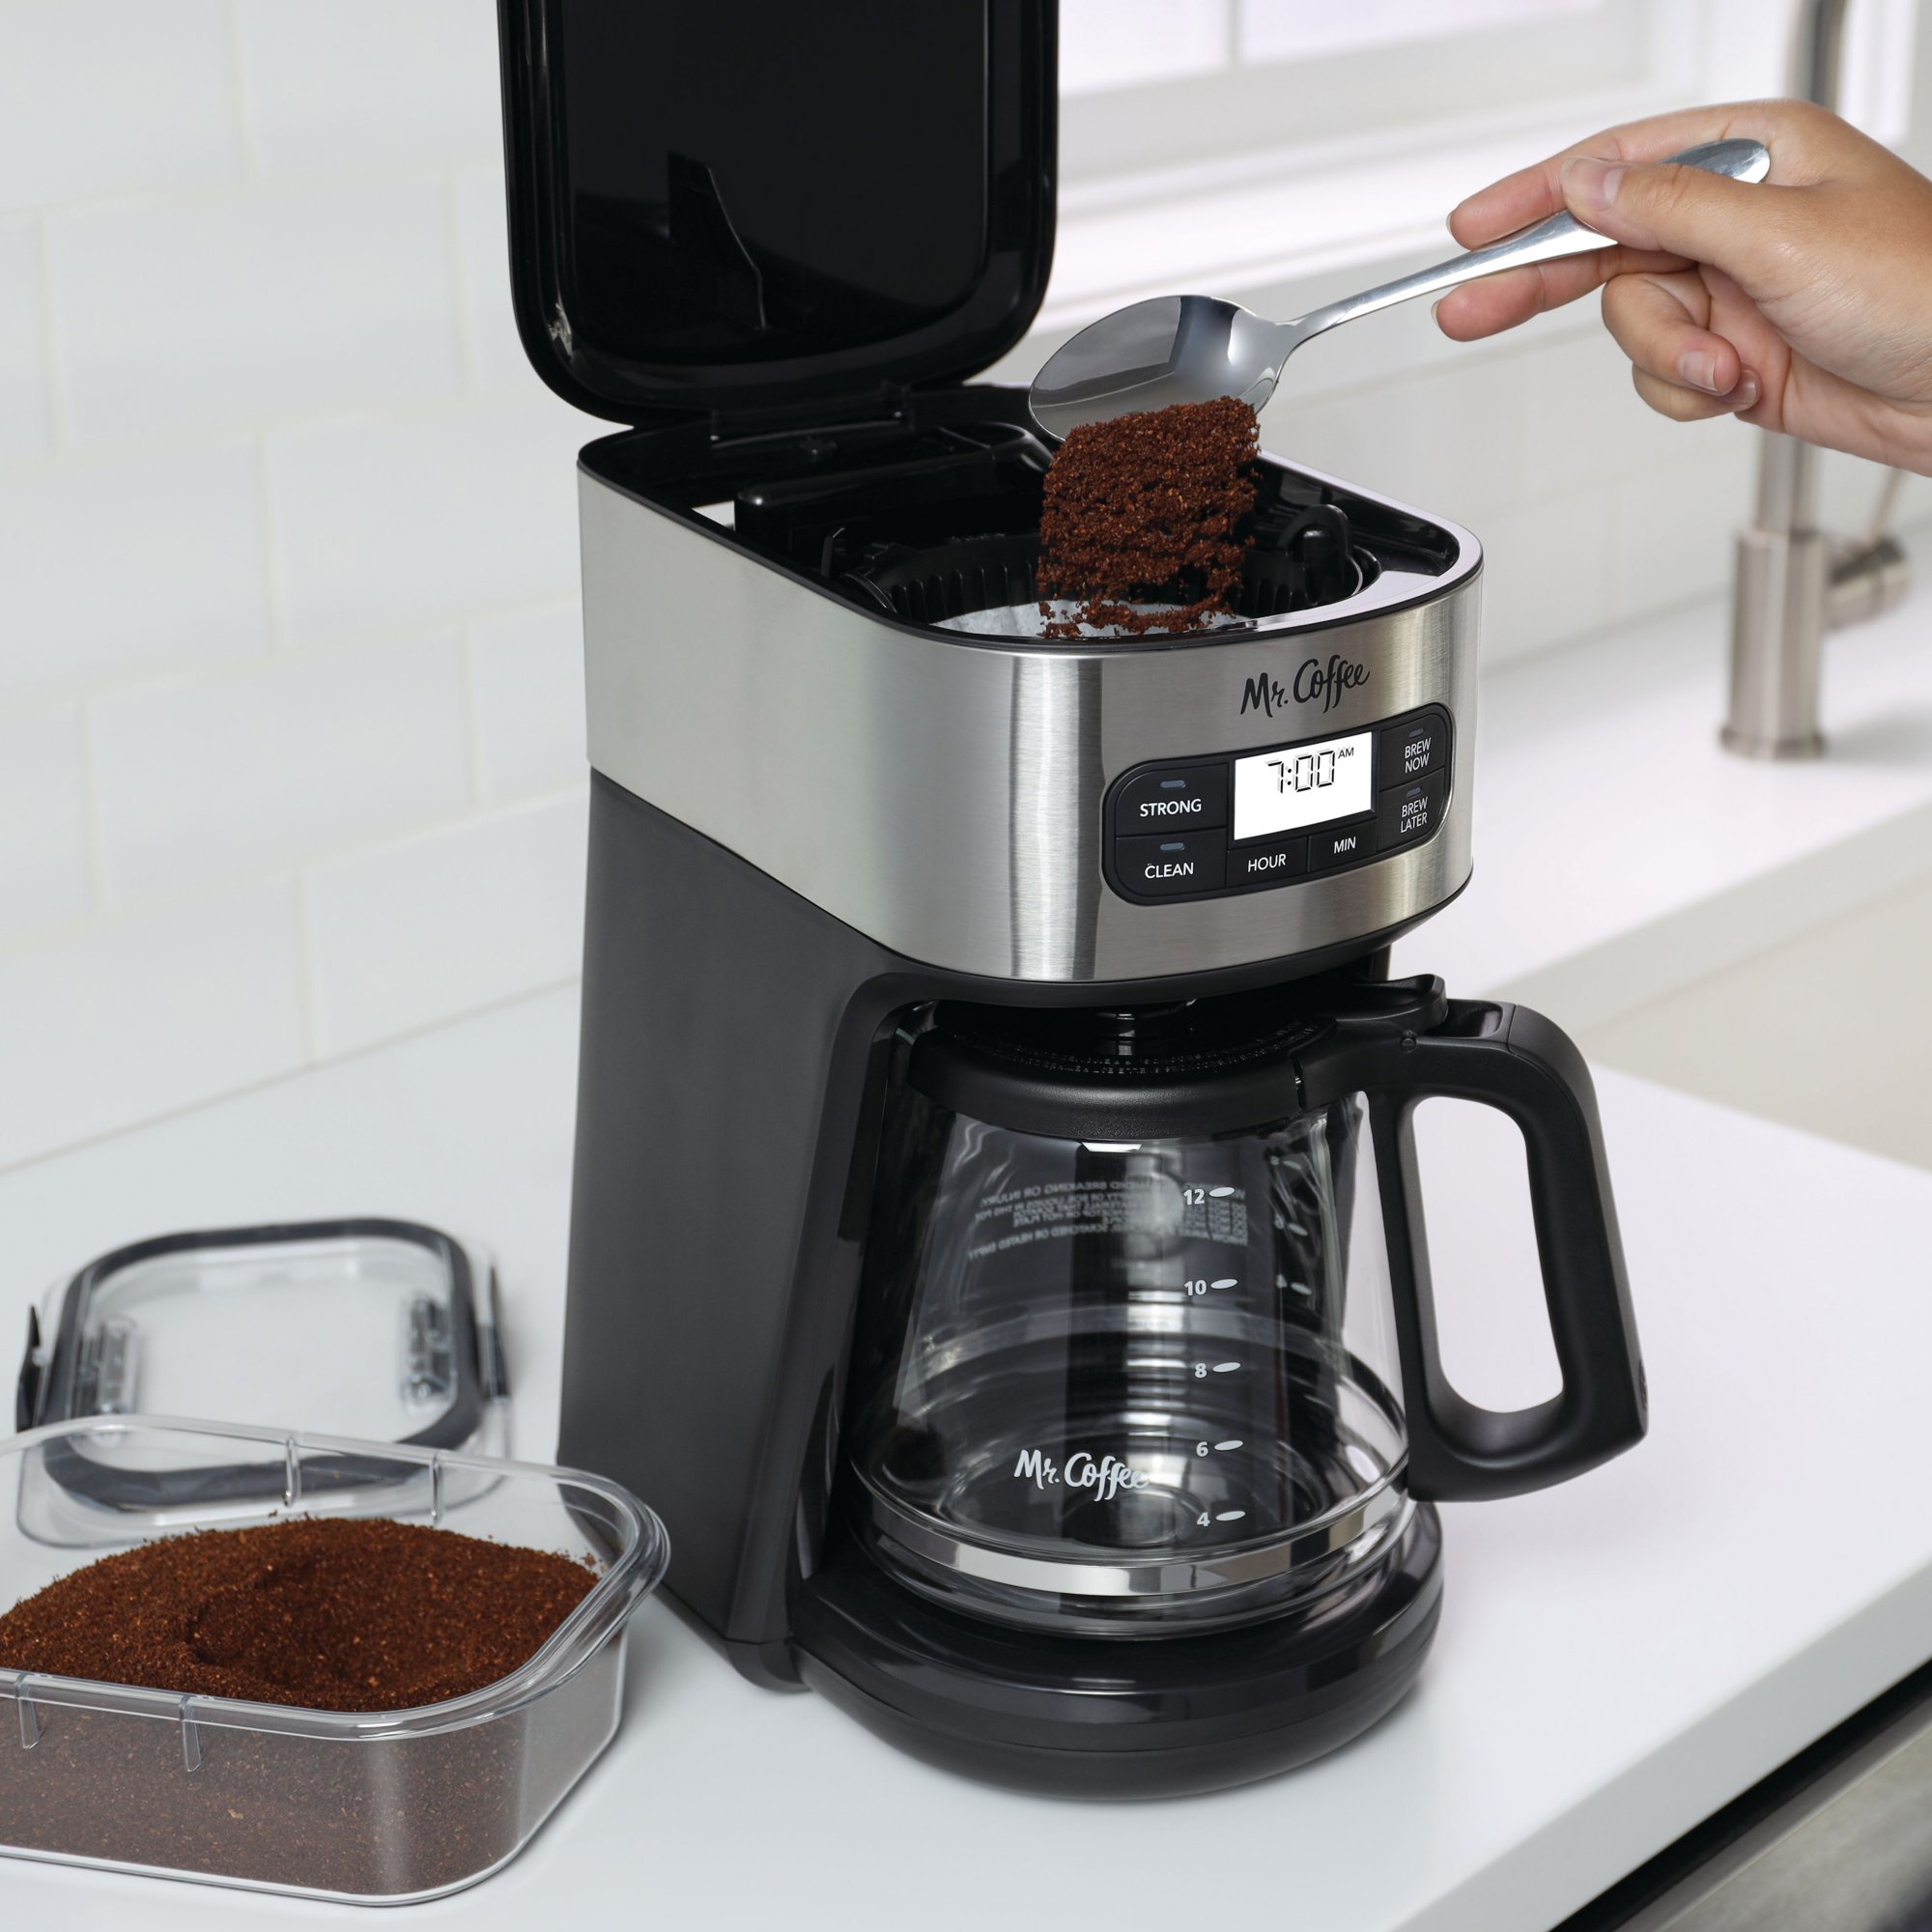 Mr. Coffee Performance Brew 12-Cup Programmable Coffee Maker